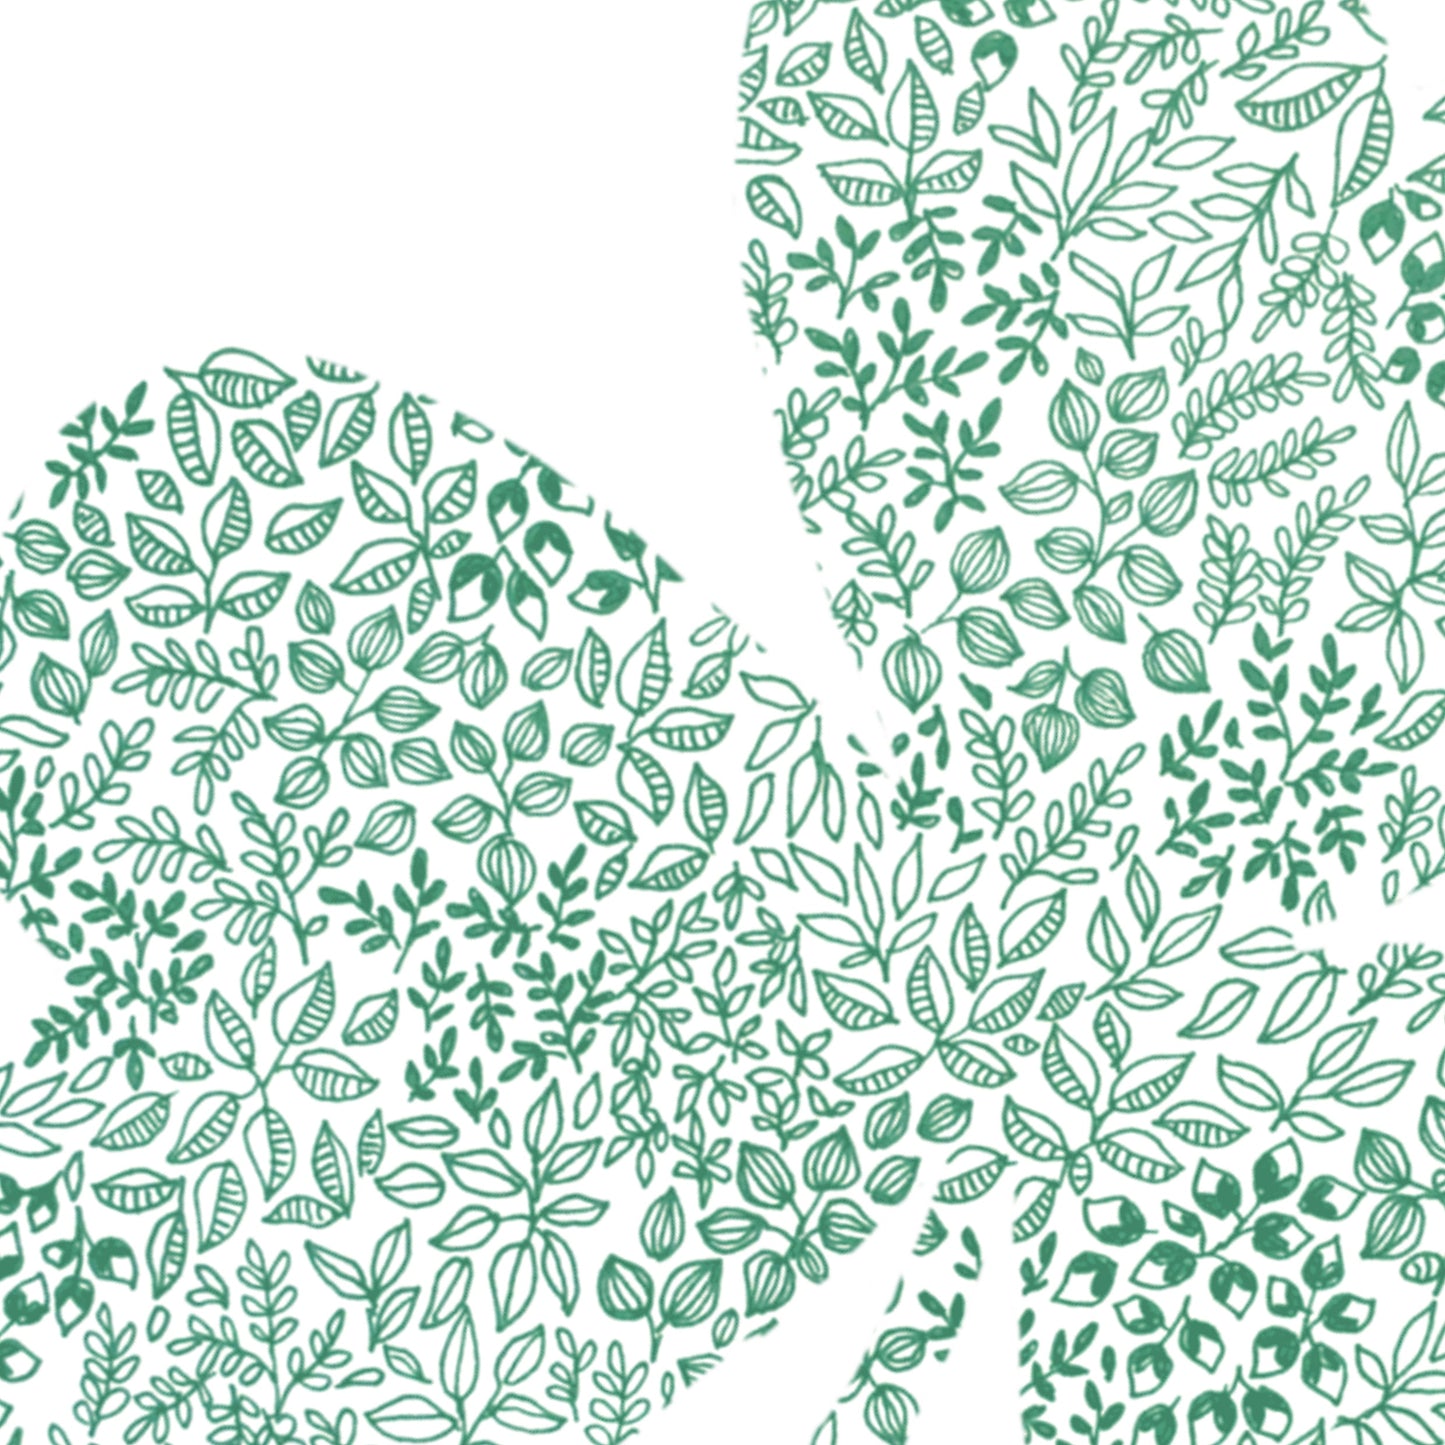 Image shows close up detailed illustration of the Irish good luck symbol the Green Shamrock. illustration is made from different flowers and plants all drawn in green. 